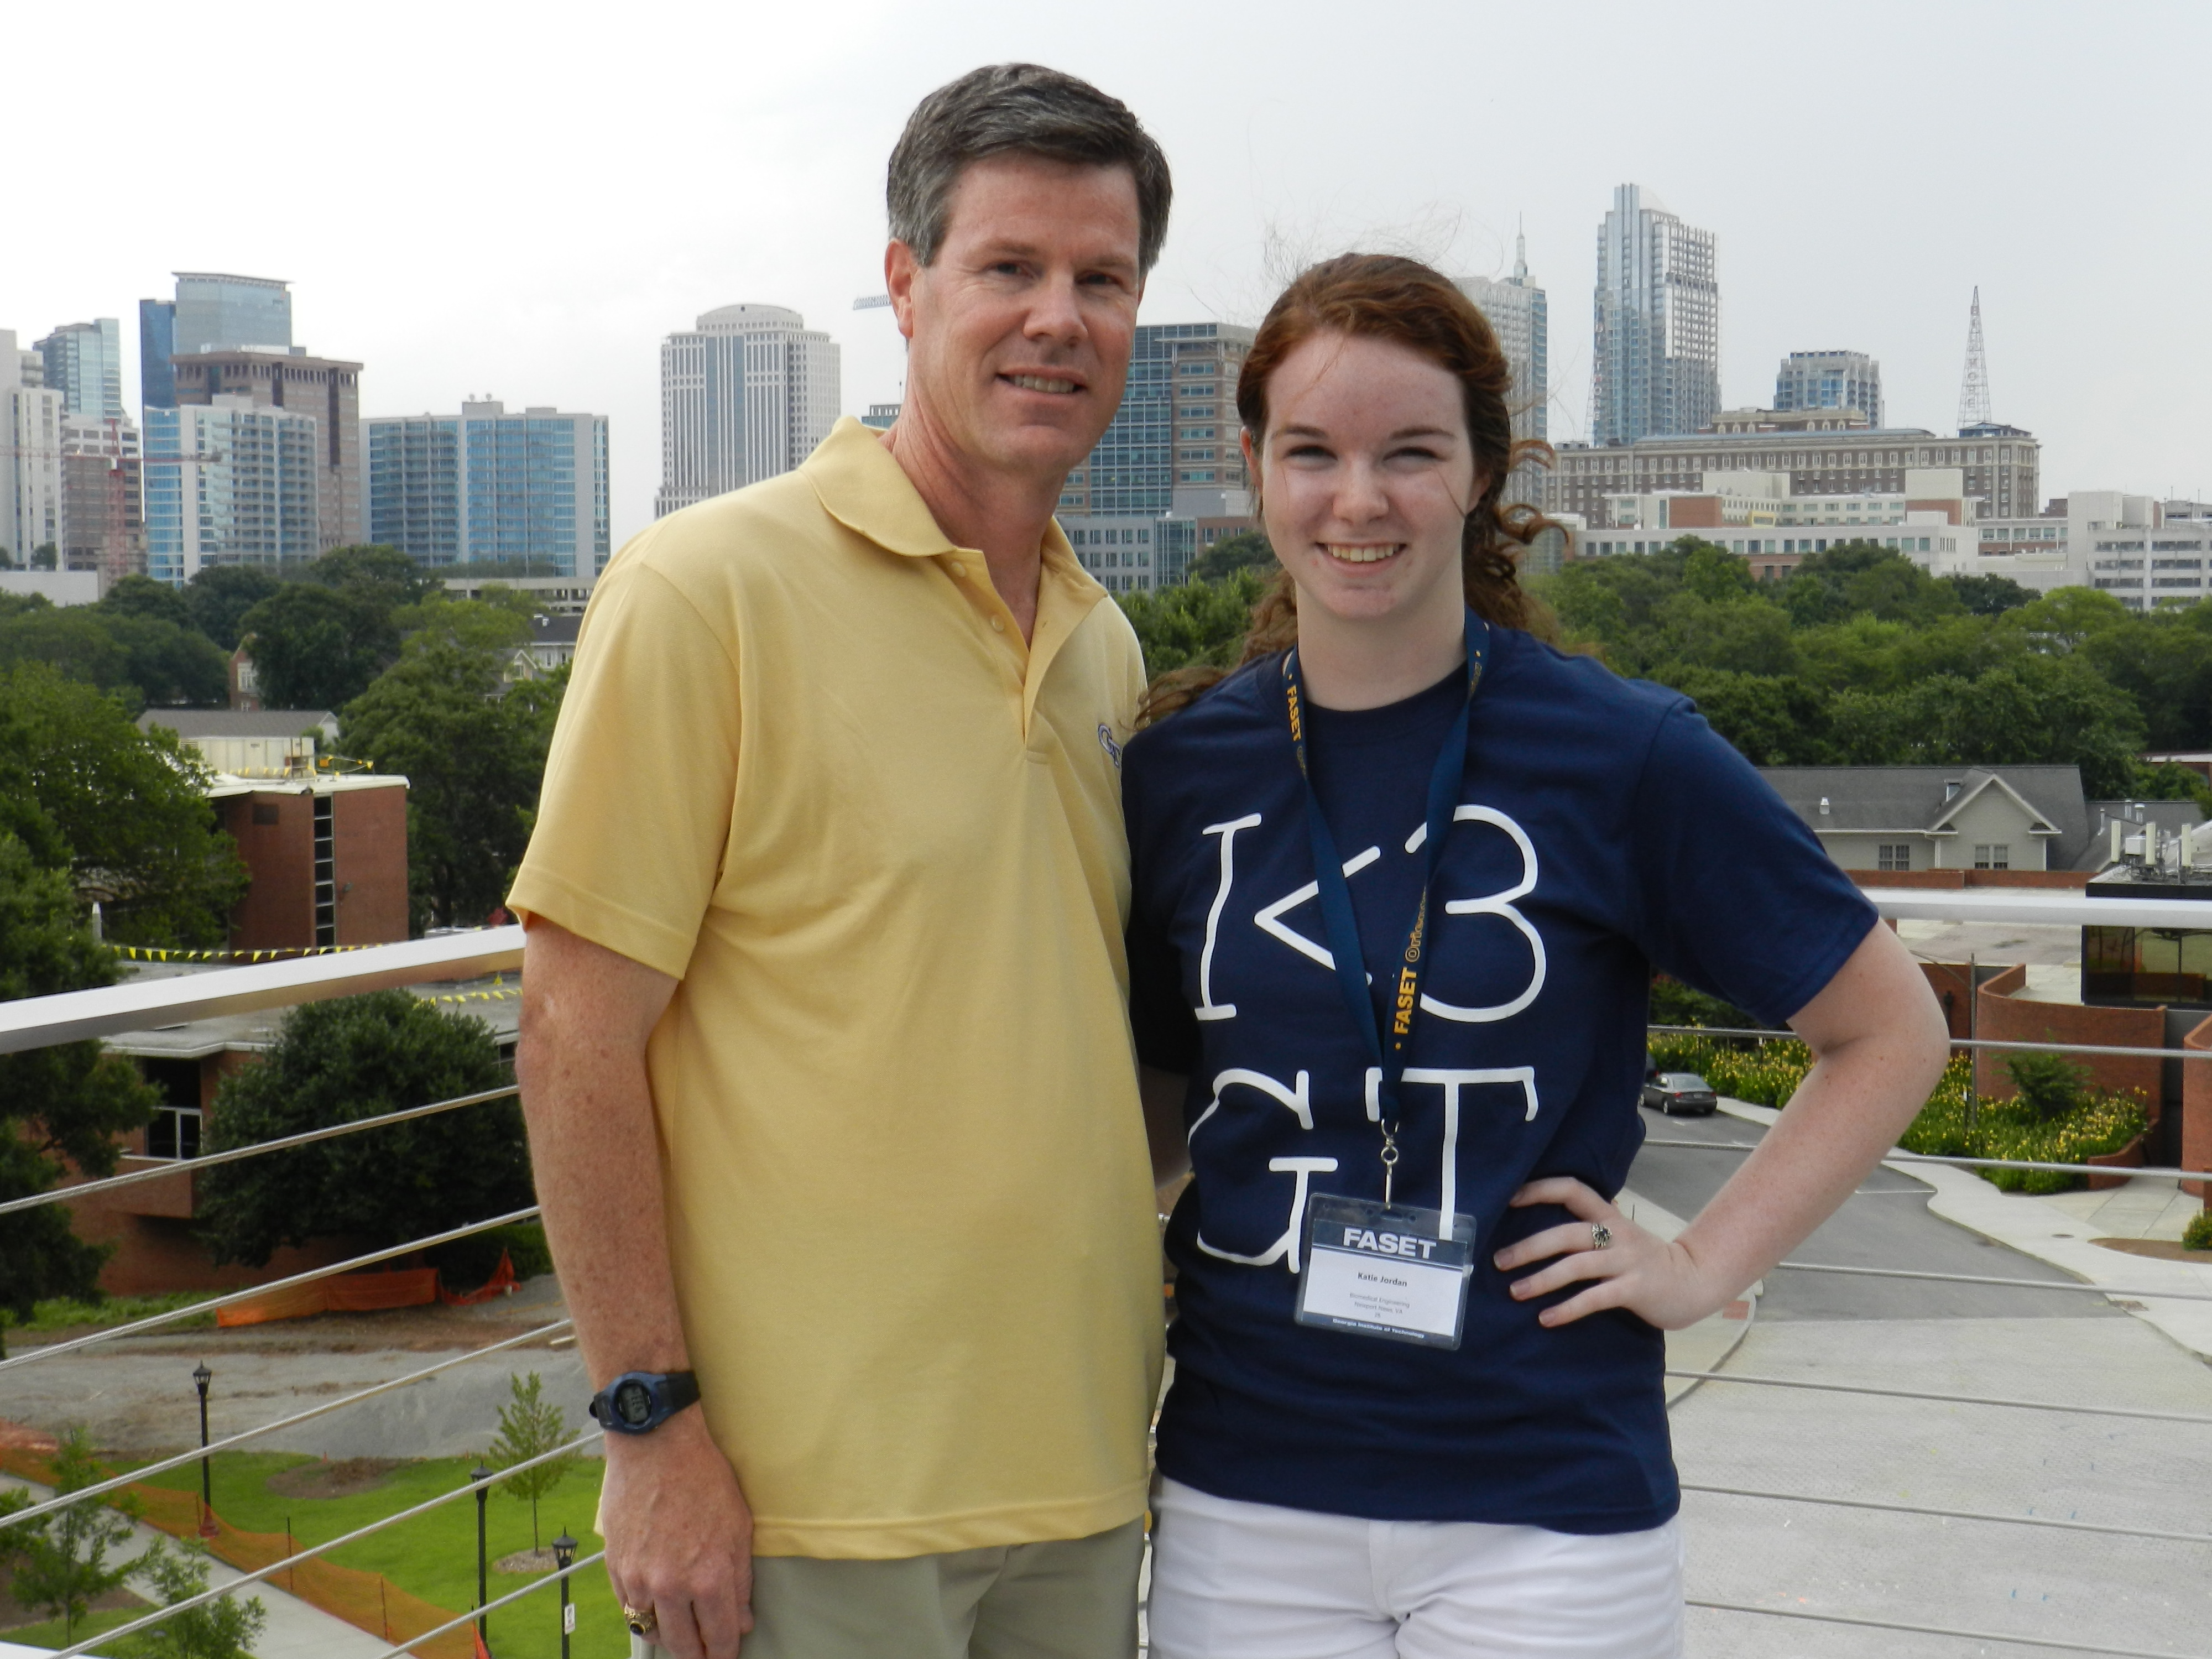 32 years after coming to his orientation, Georgia Tech graduate Chris Jordan is back on campus with his daughter Katie, who is starting at Tech this fall.